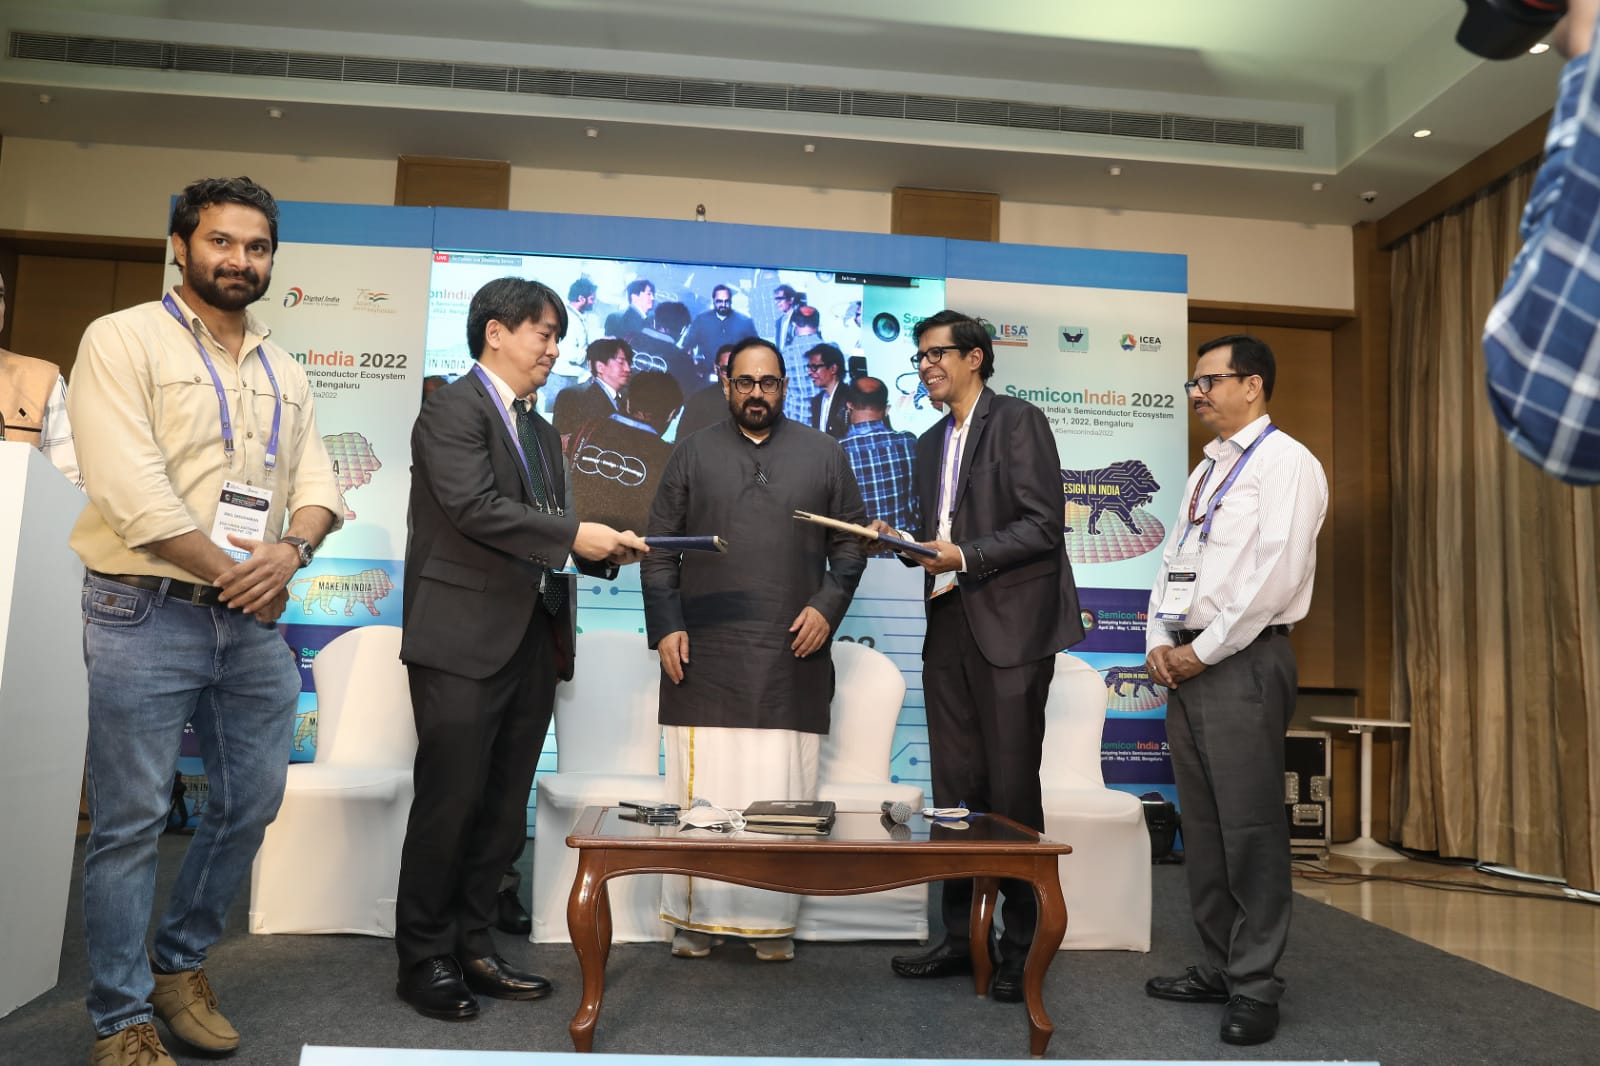 SemiconIndia Conference 2022 sets in motion the roadmap to catalyze semiconductor ecosystem